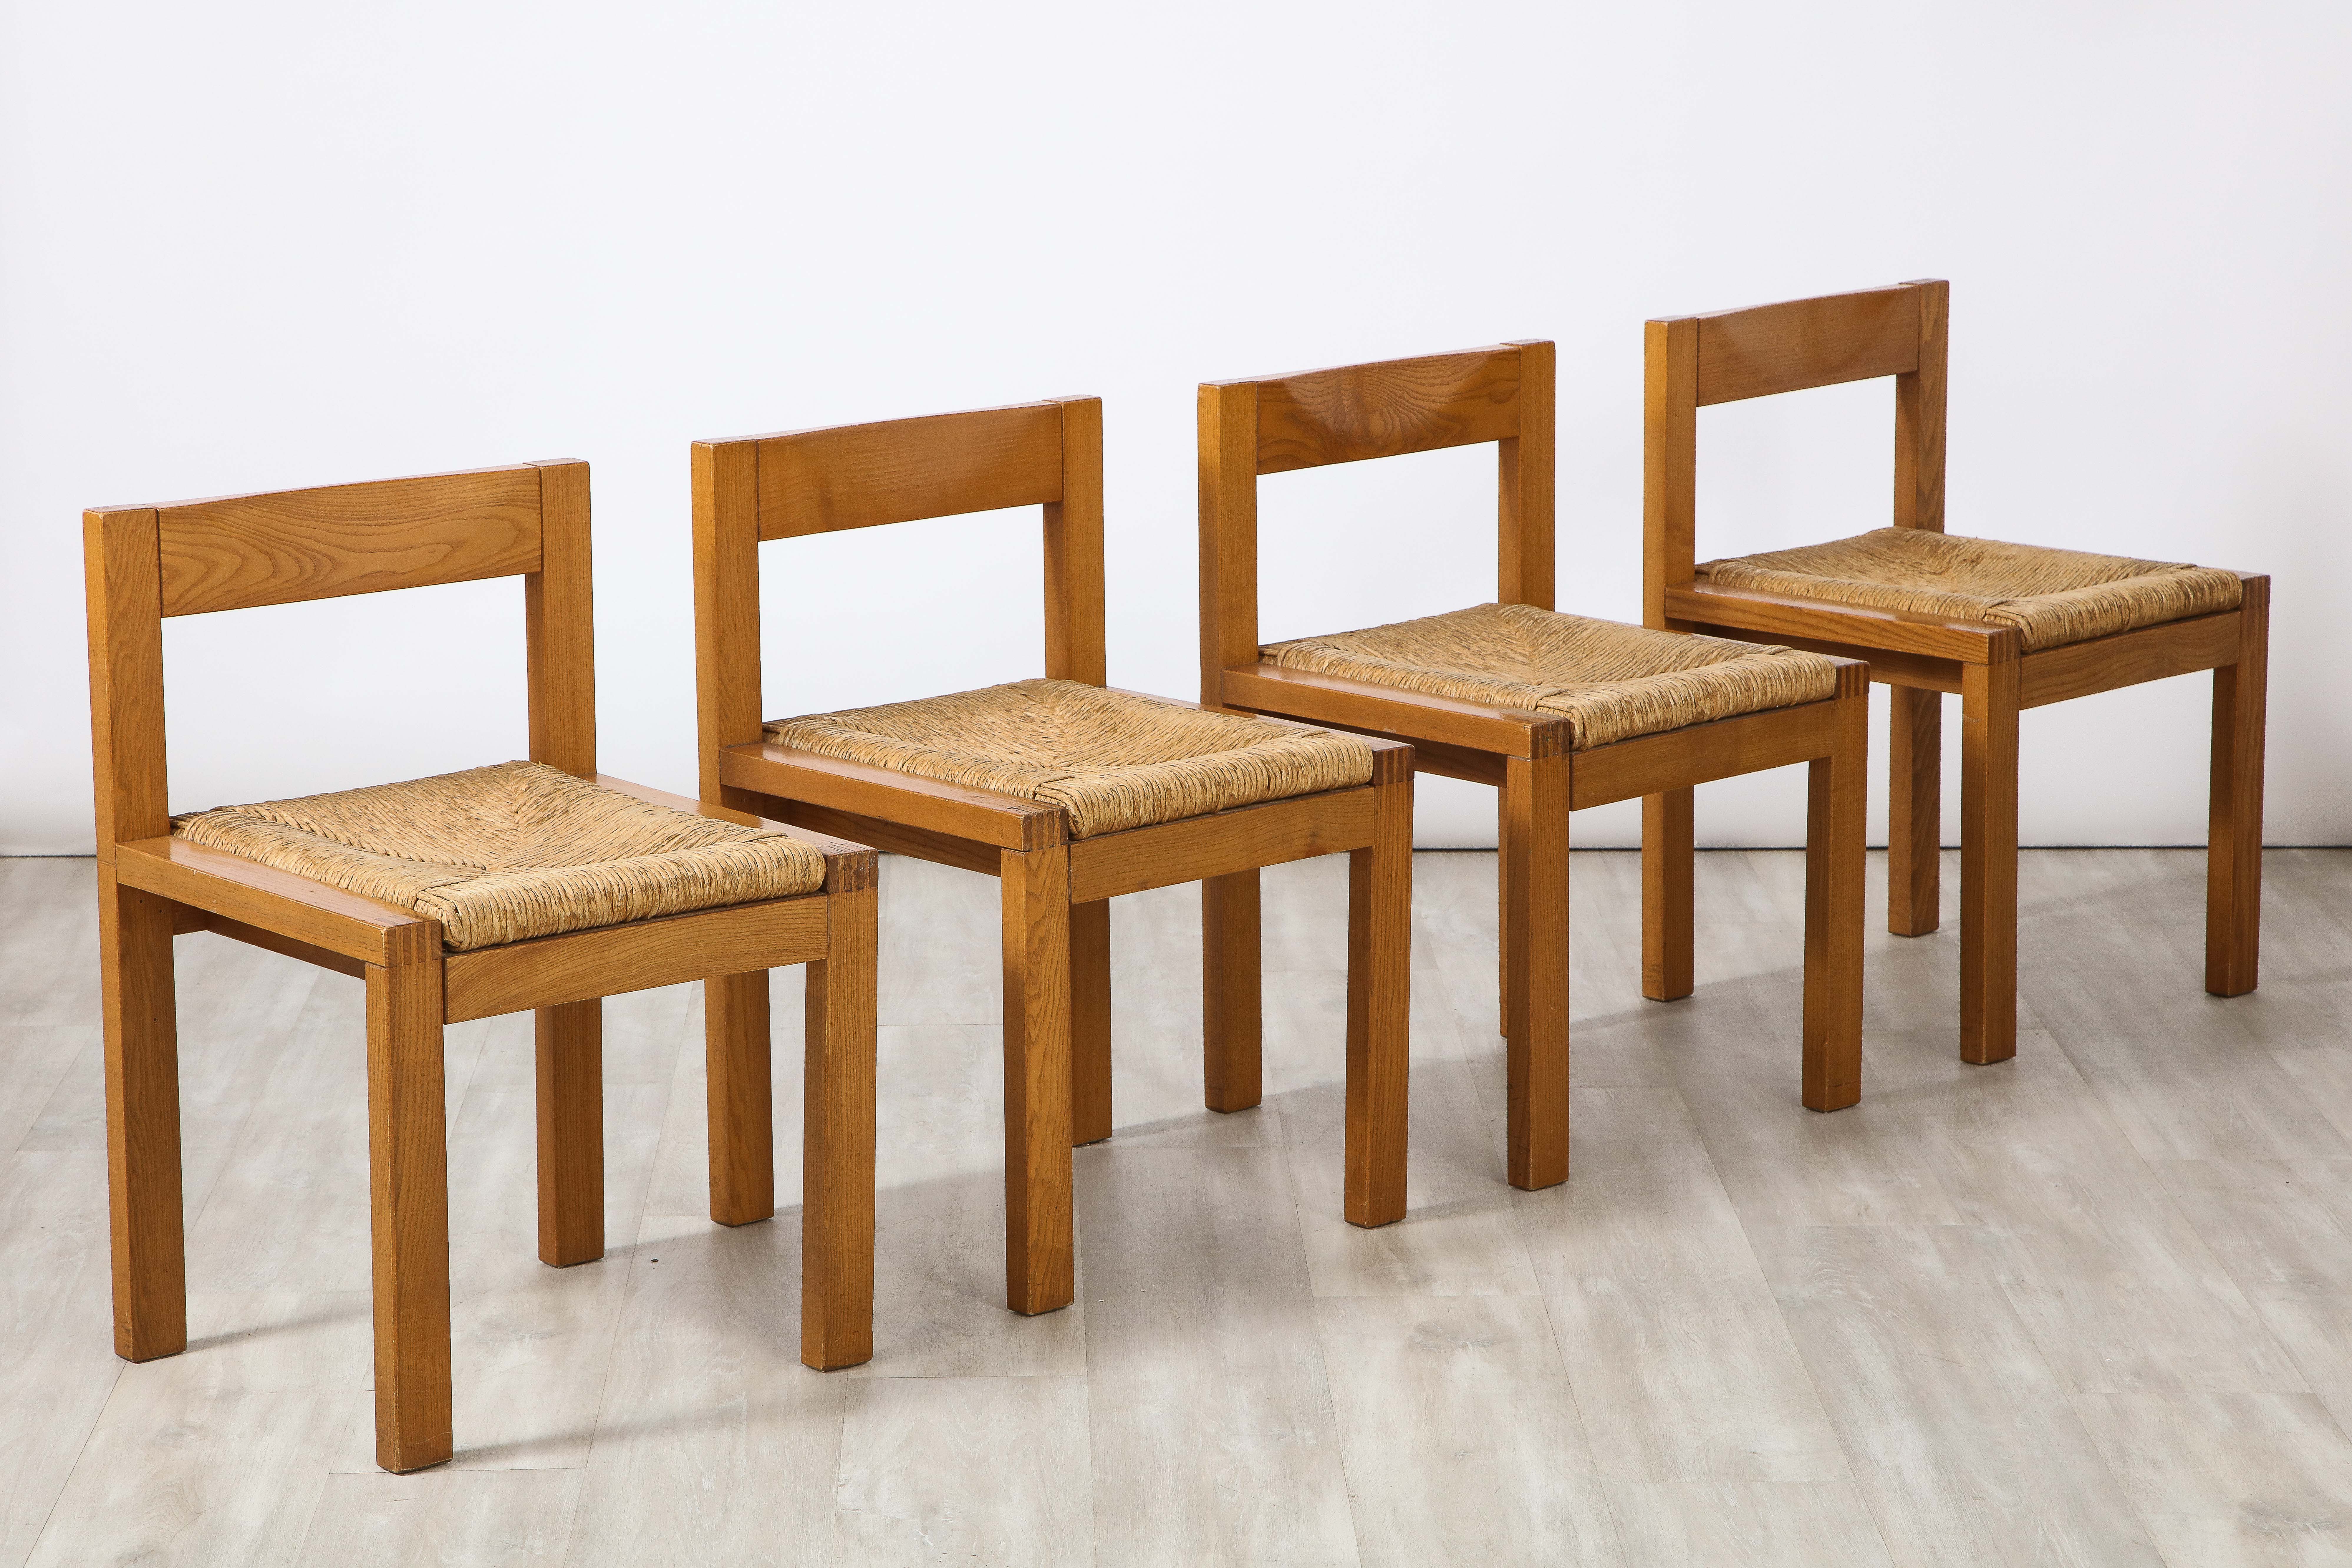 A charming set of four Italian rustic oak and rush seat dining chairs, with horizontal slat open backs.  Simply and beautifully handcrafted with graceful proportions and an organic modern feel.
Italy, circa 1950's
Size: 26 3/4